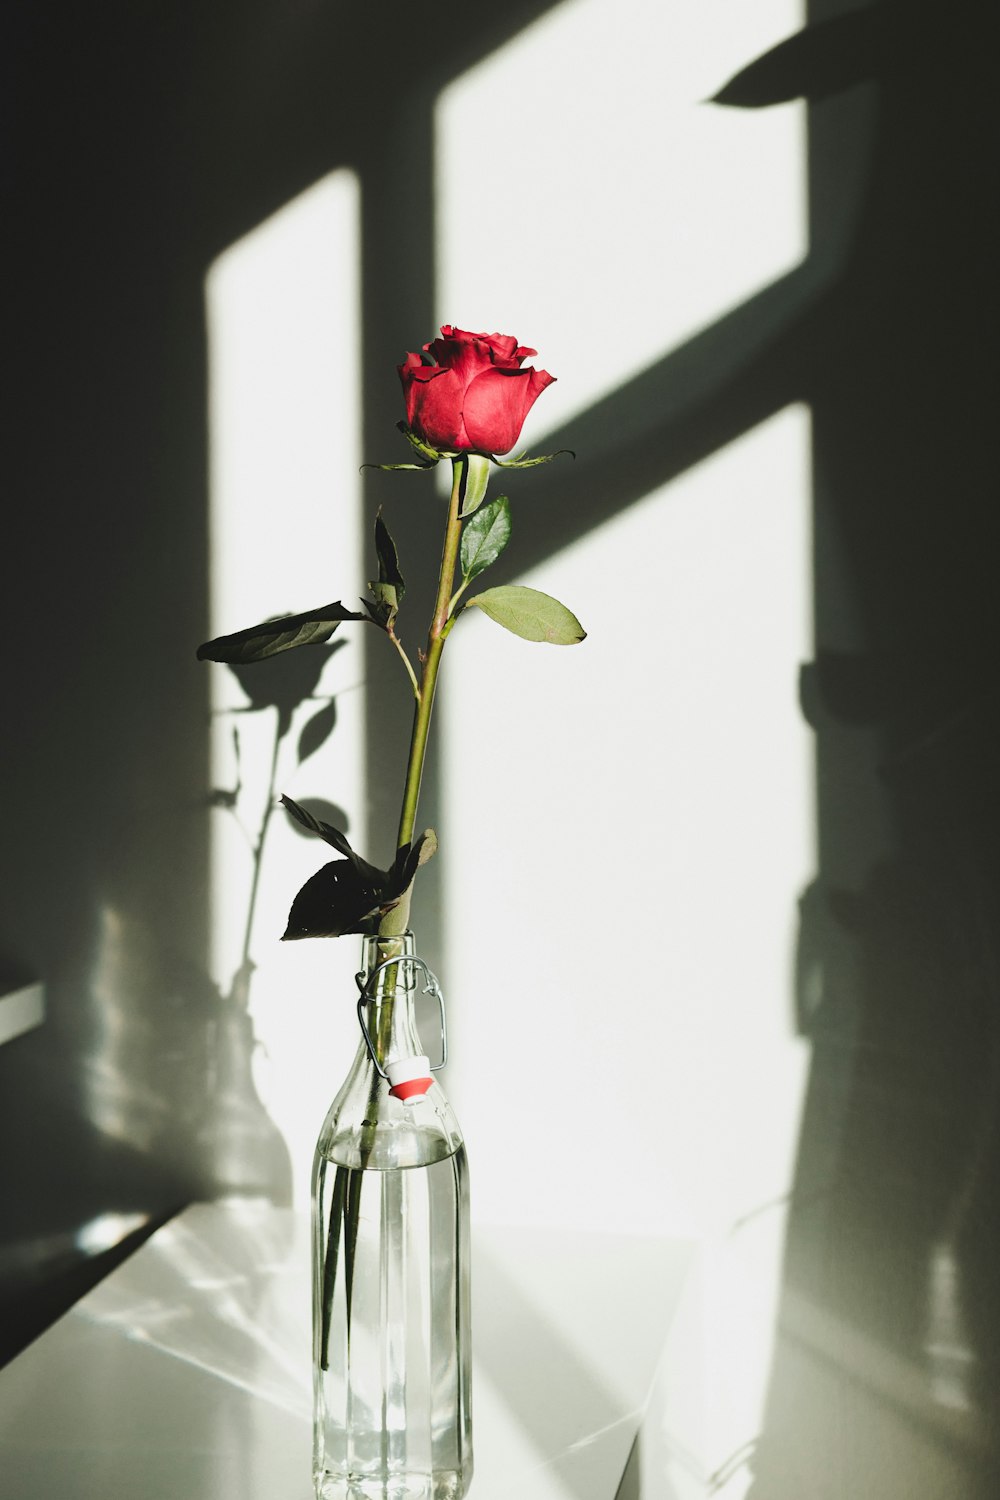 red rose in clear glass vase